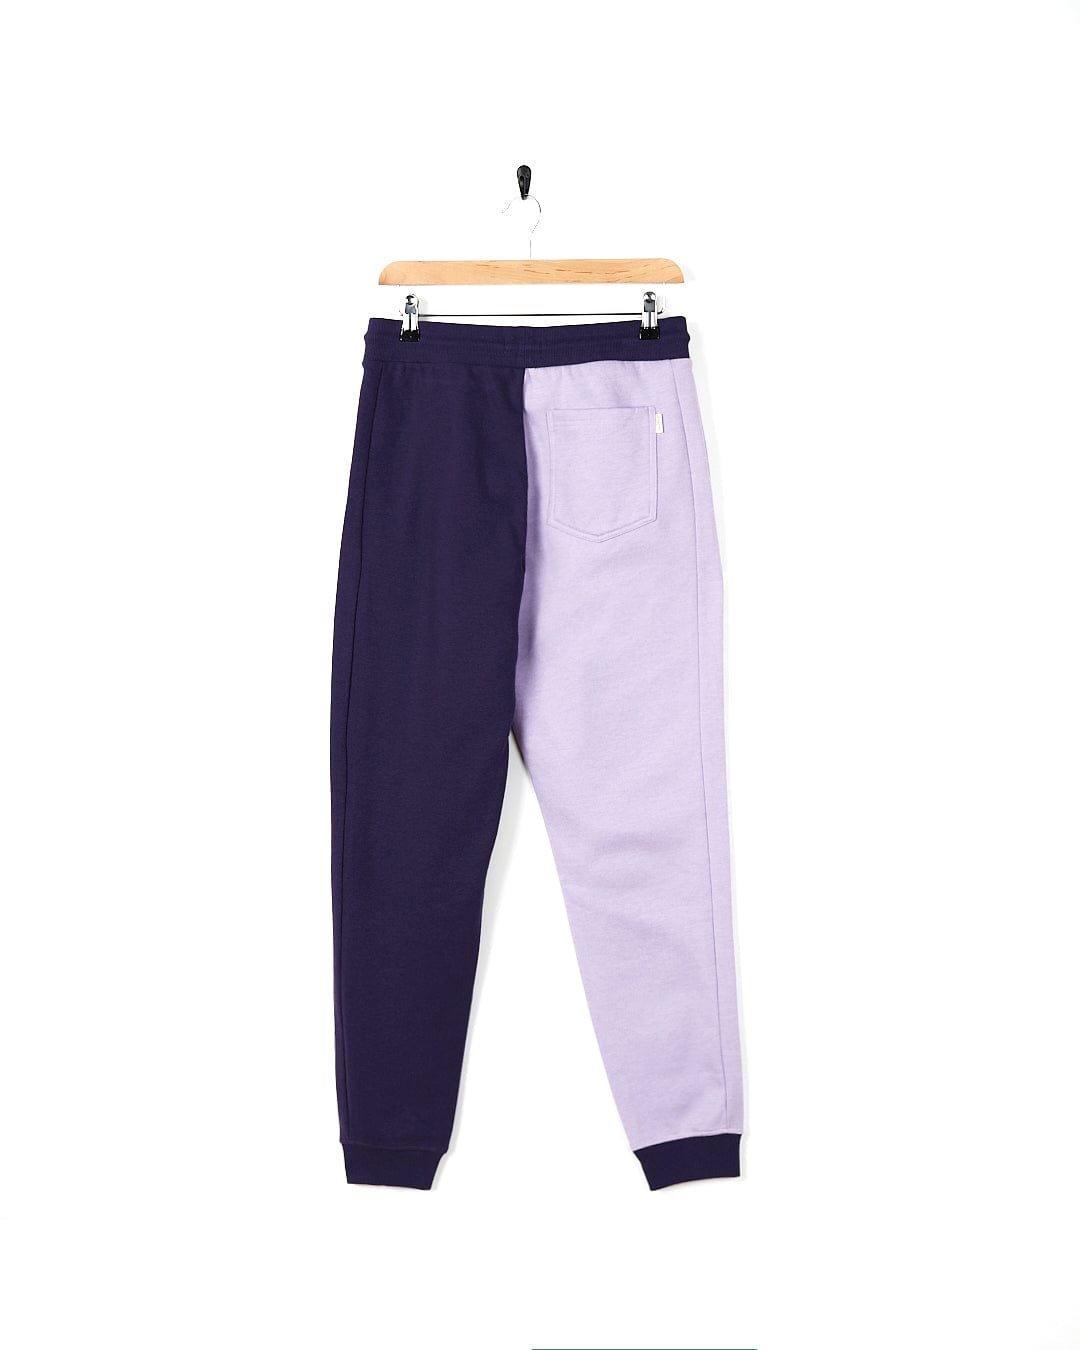 A pair of Betty - Womens Jogger - Light Purple sweatpants by Saltrock hanging on a hanger.